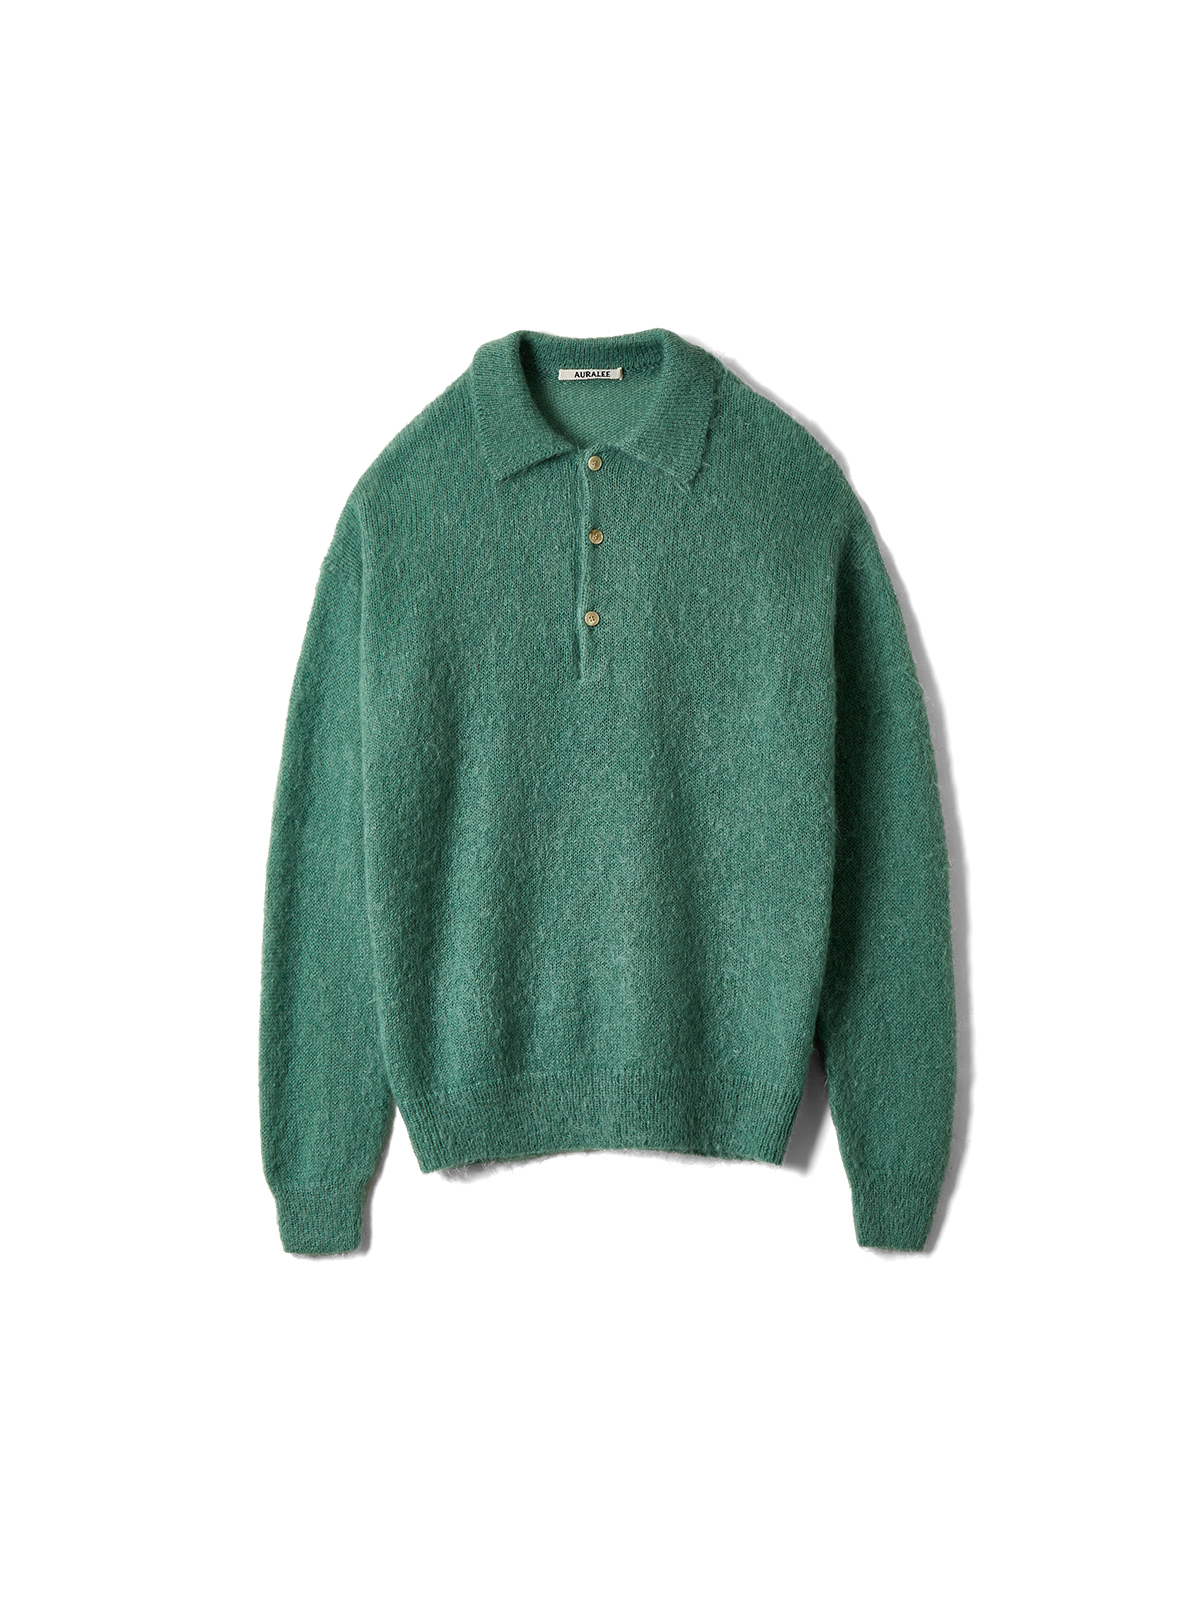 BRUSHED SUPER KID MOHAIR KNIT POLO (JADE GREEN)